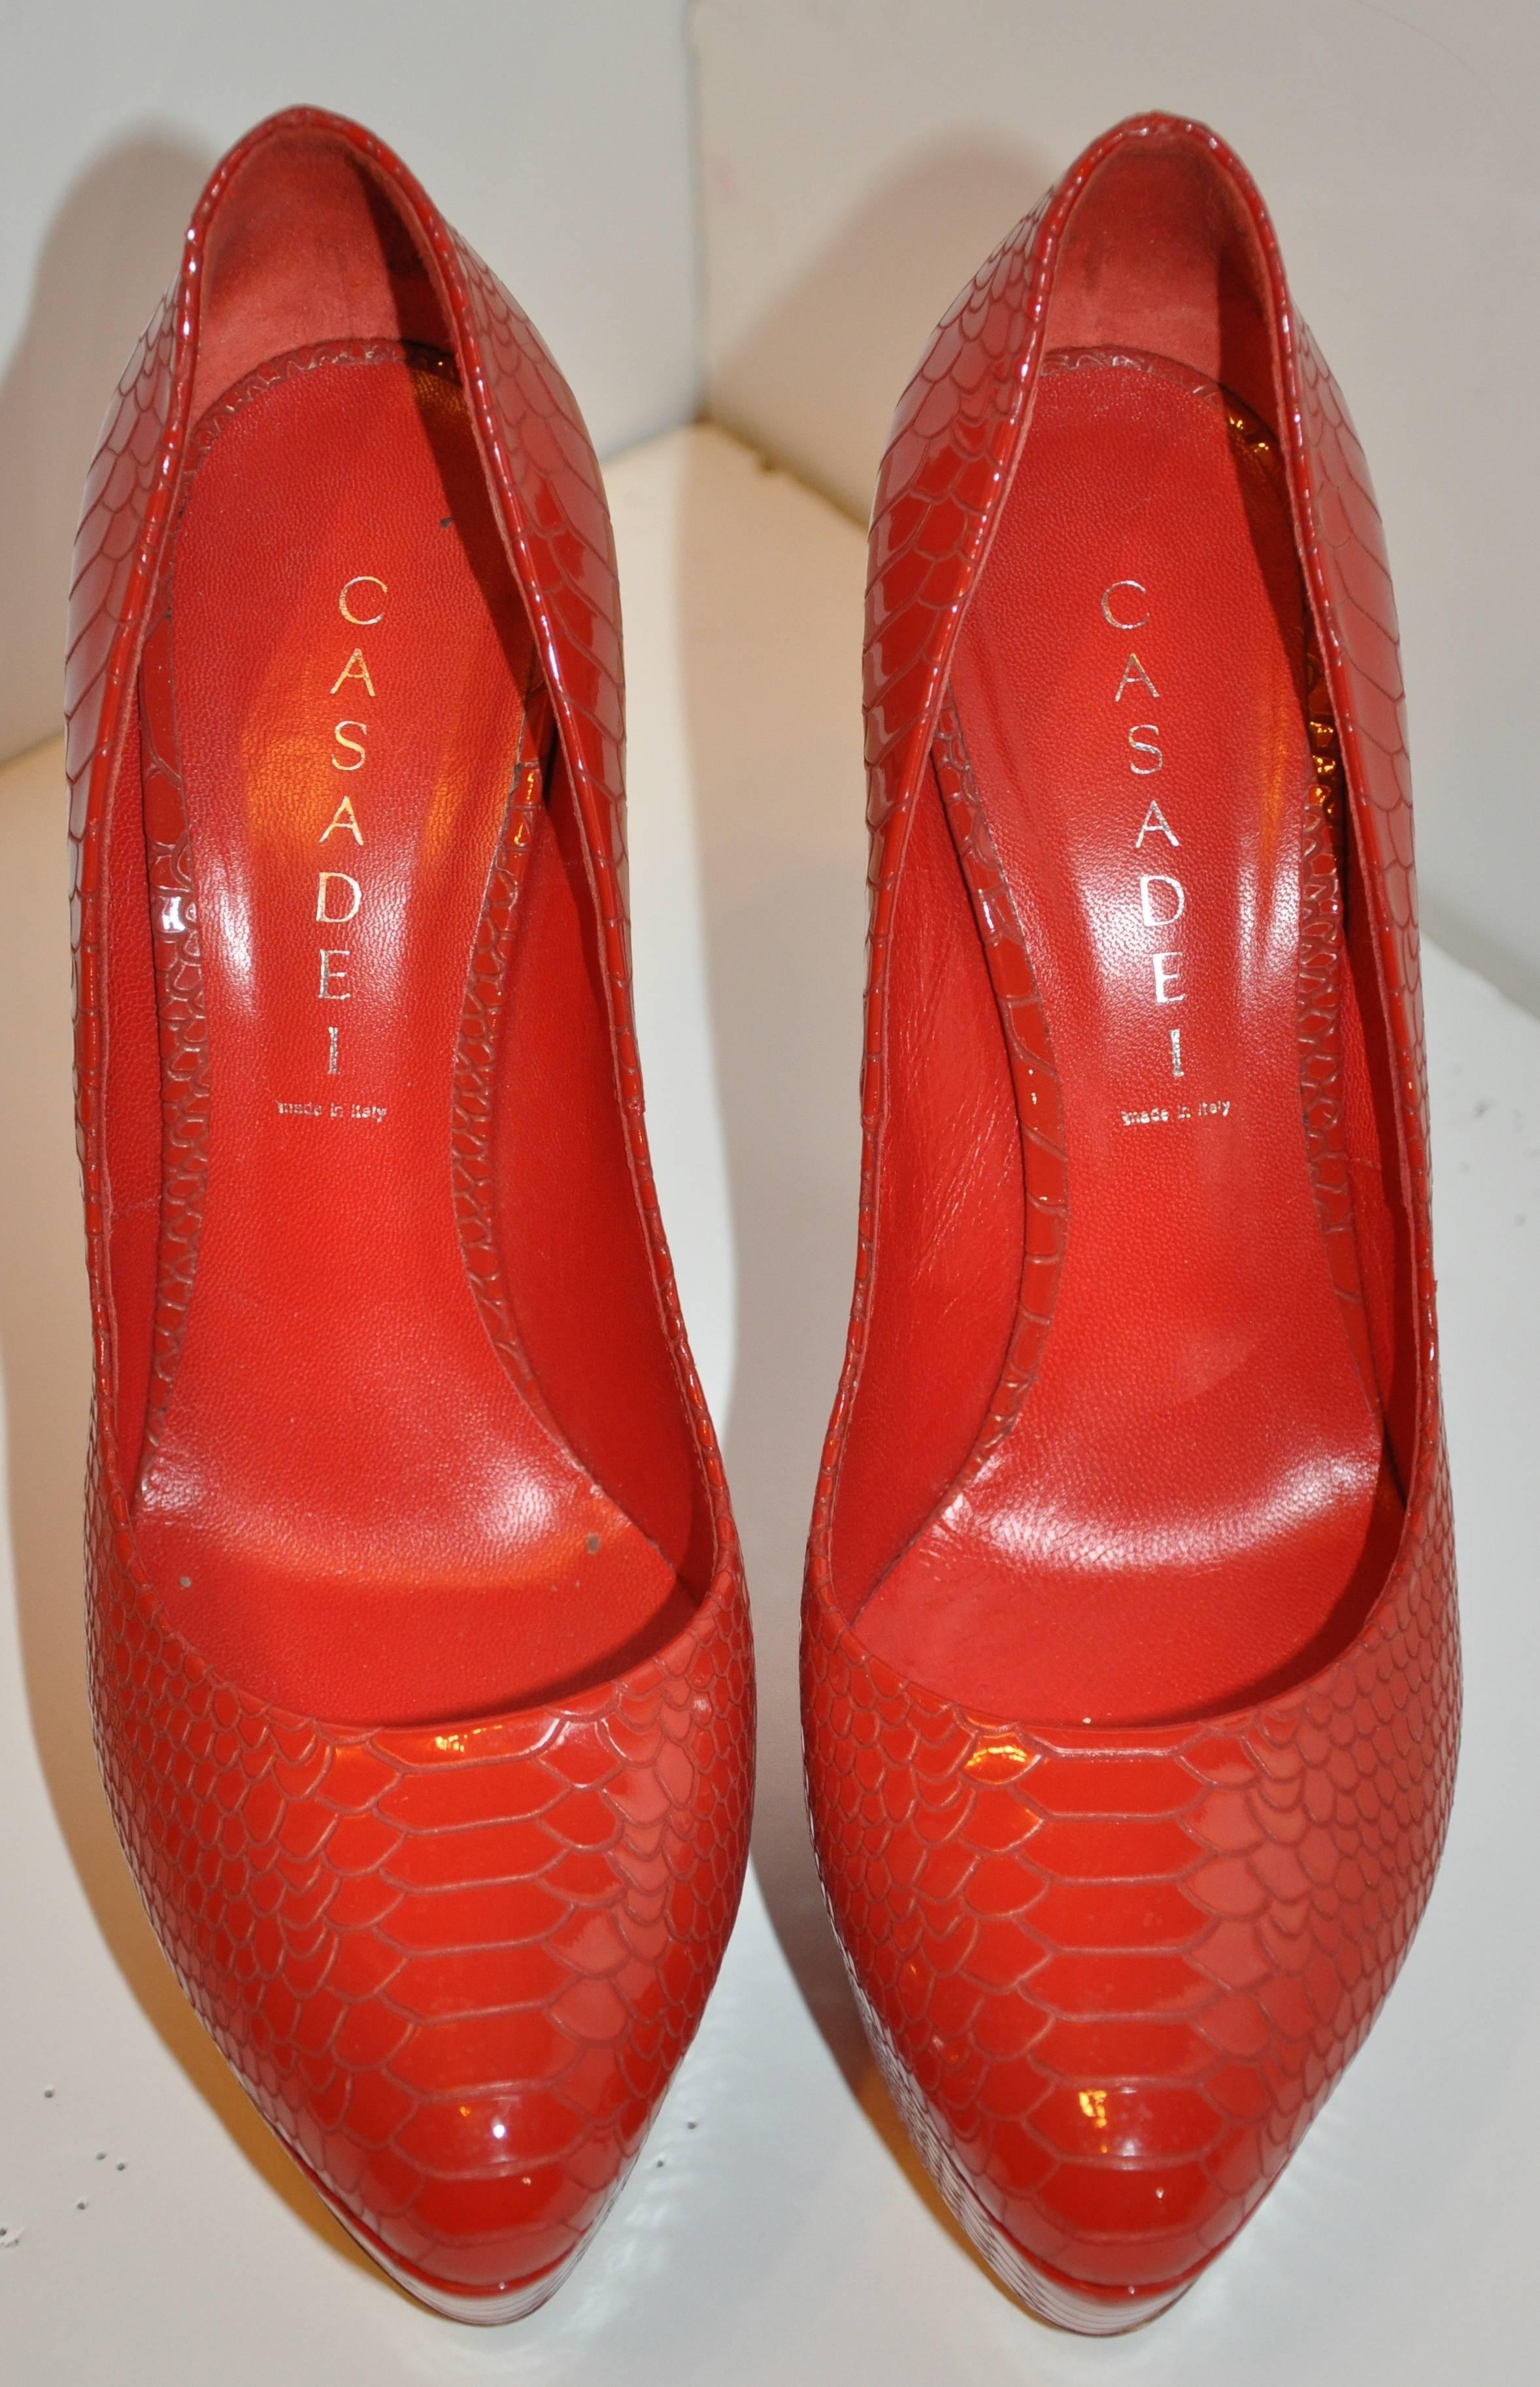      Casadei wonderfully wicked bold fire-engine red embossed lizard patent leather platform pumps are sized 9B,  39/Italy. The back heel measures 6 inches in height, front's height measures 1 1/2 inches. The length from front to back measures 7